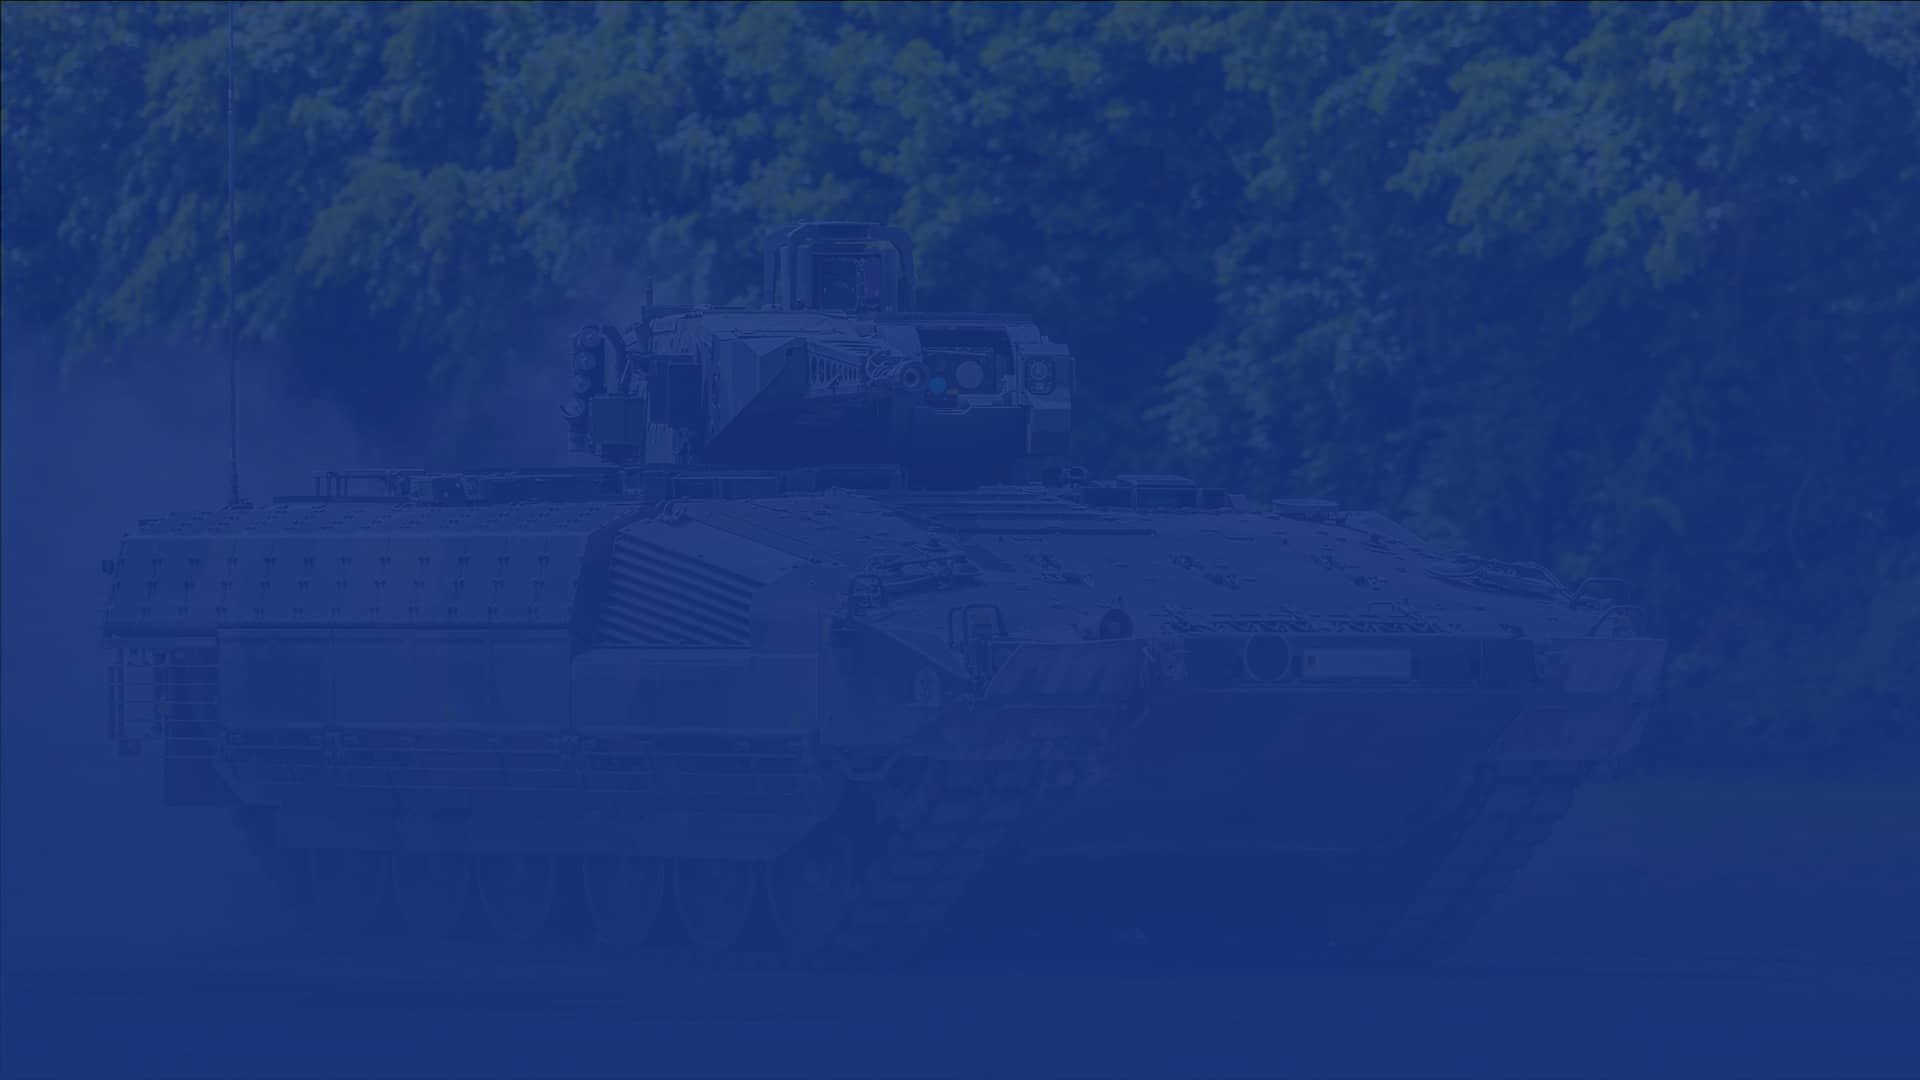 A tank with a blue filter which stands for safety and technology